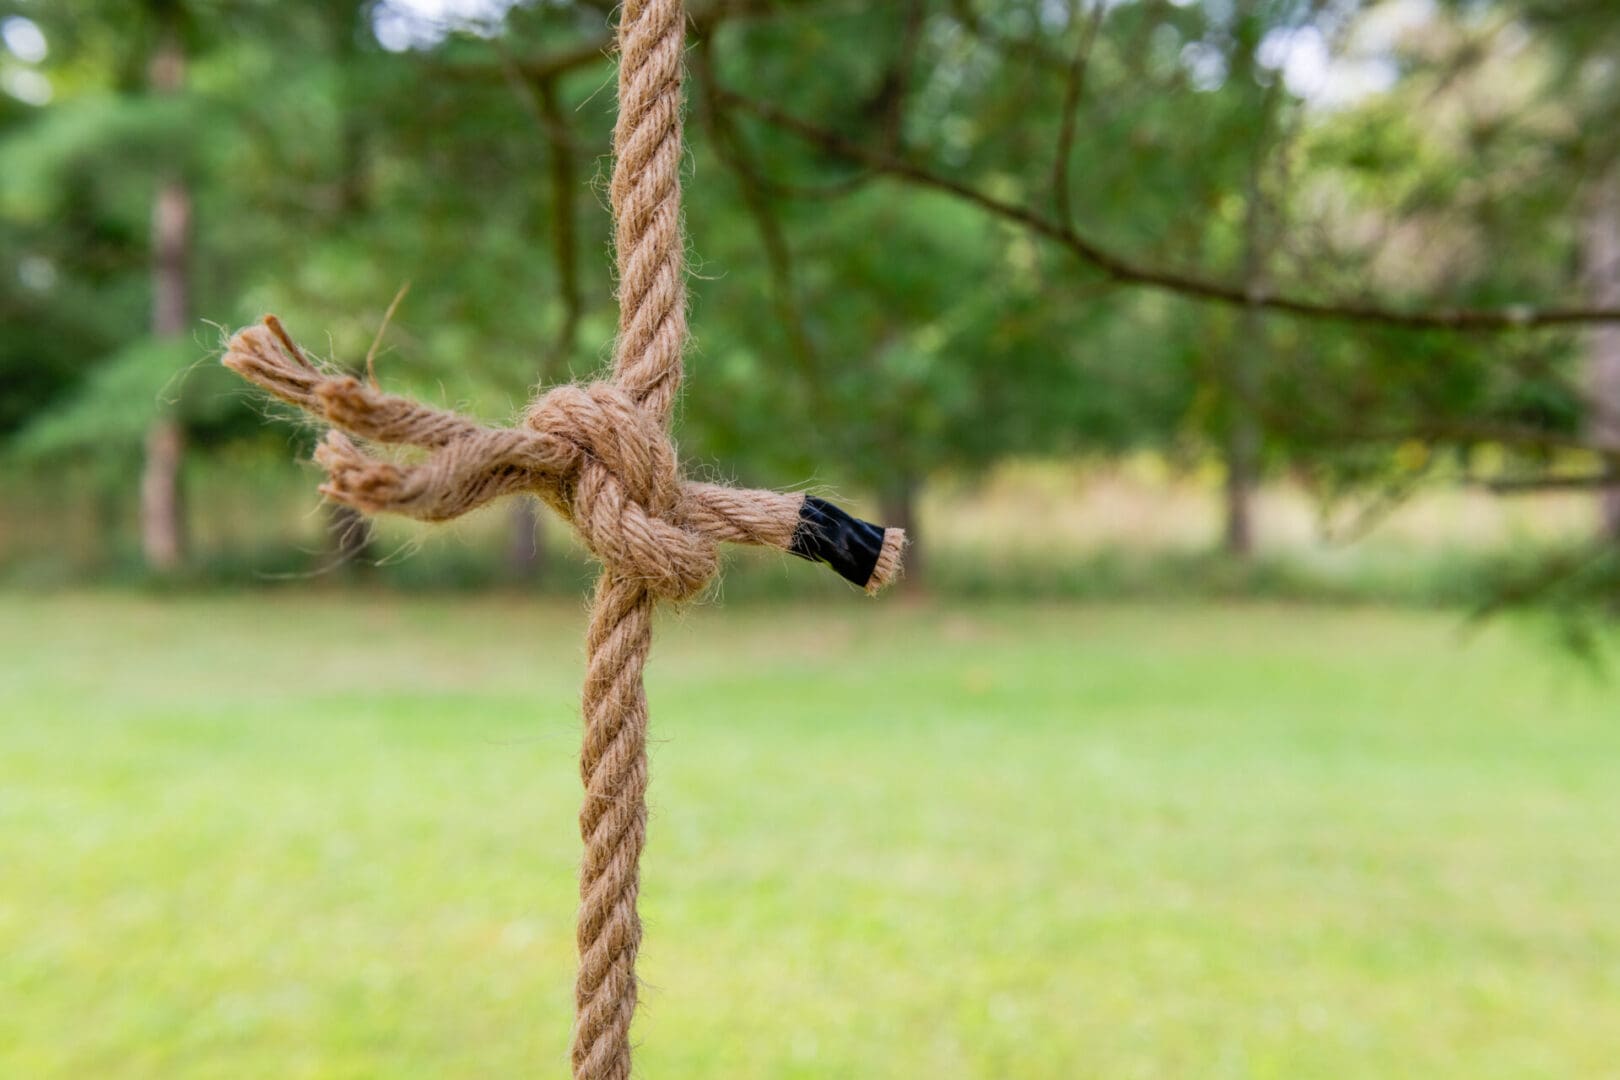 A rope tied to a wooden pole with a pencil stuck in it.